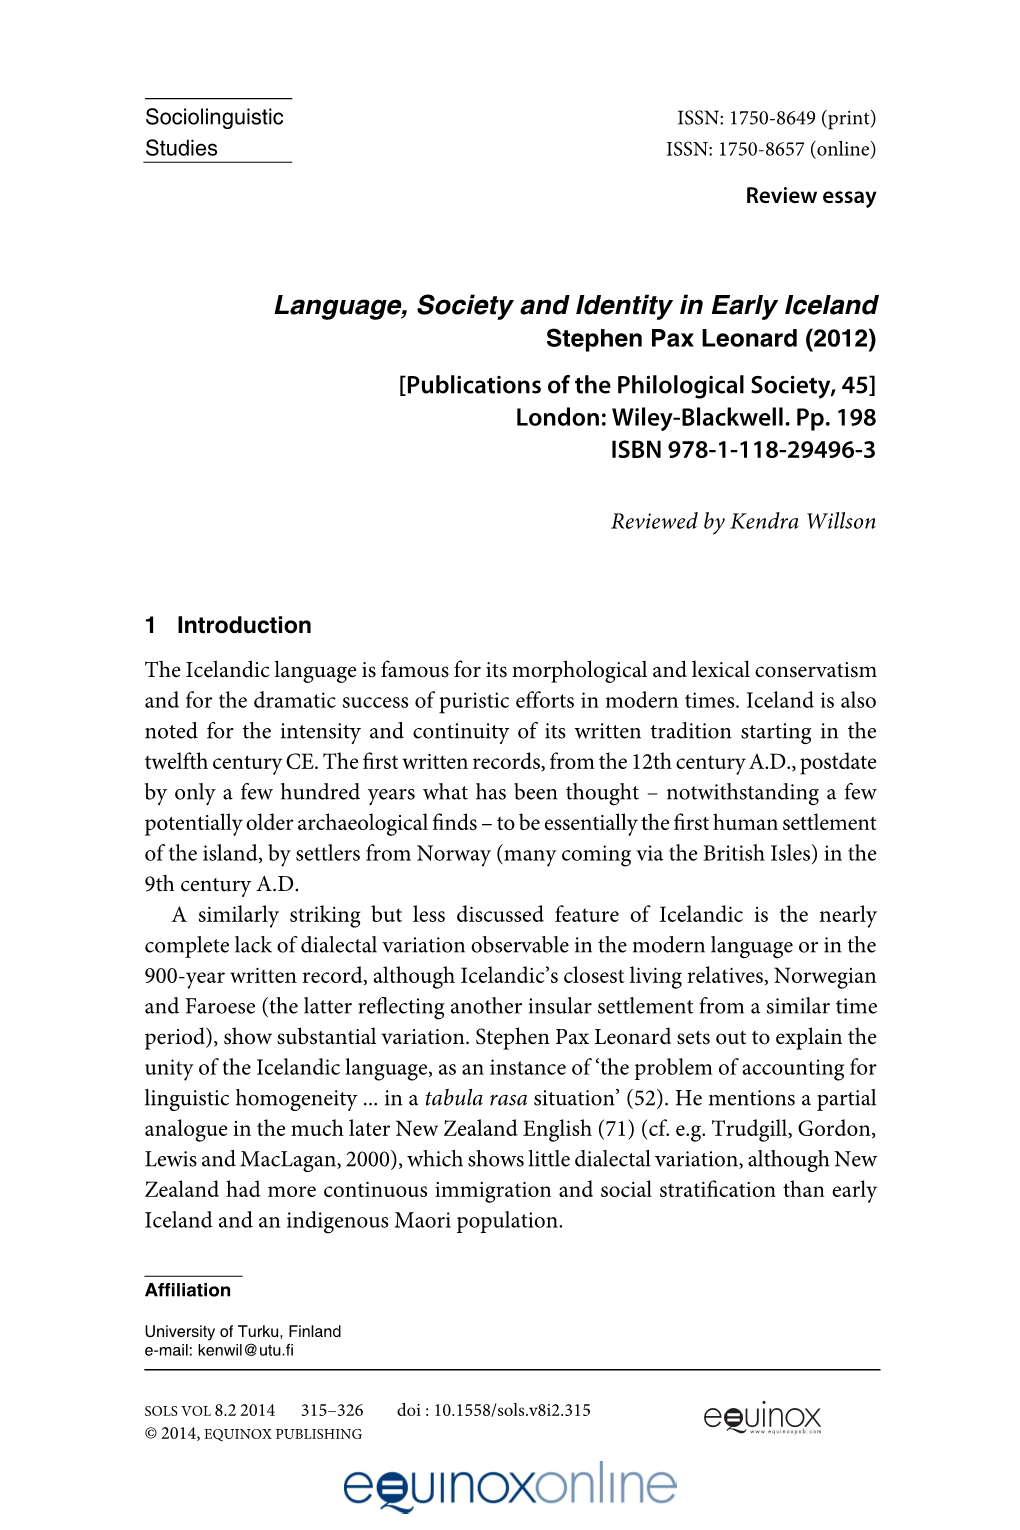 Language, Society and Identity in Early Iceland Stephen Pax Leonard (2012)